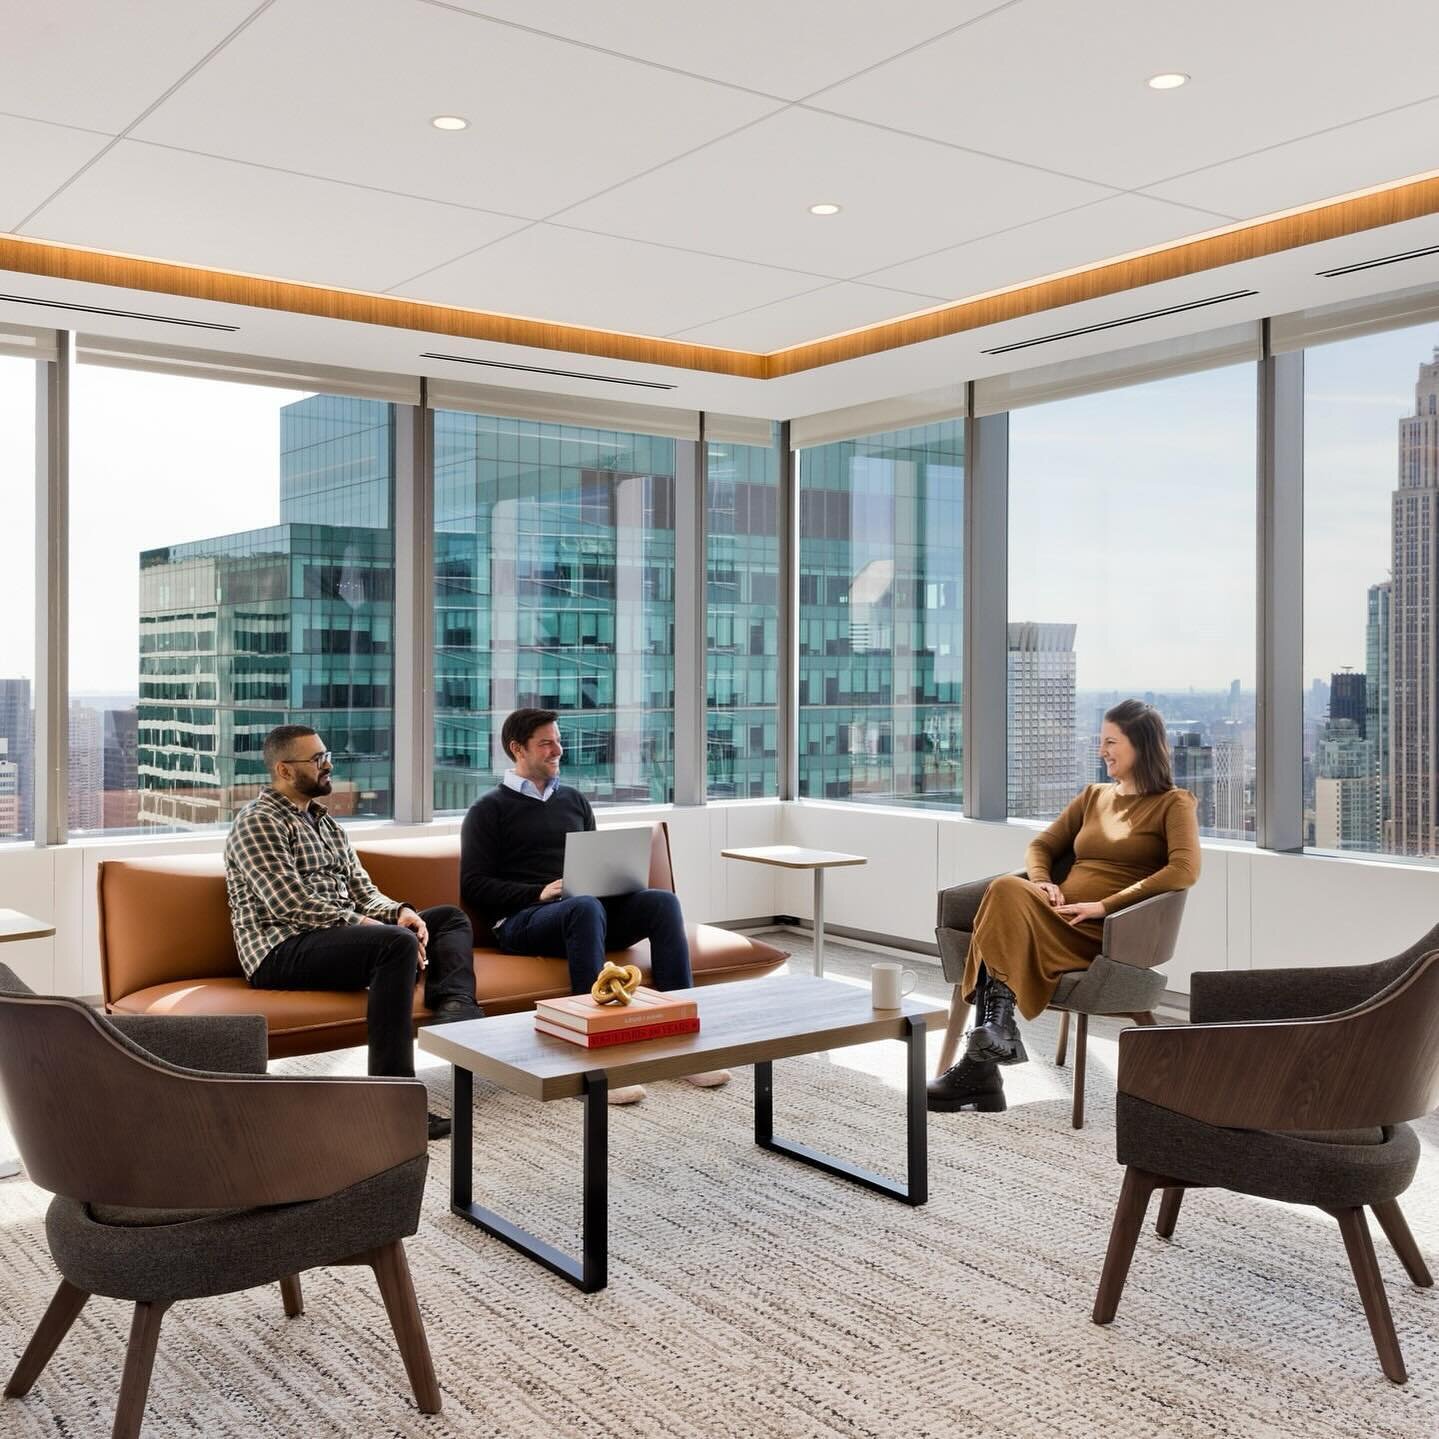 Spectorgroup recently designed a stunning and sophisticated office space in NYC for Varagon Capital Partners. We were thrilled to have our Twirl lounge chairs along with several other products by @encoreseating and @arcadiacontract included in the pr